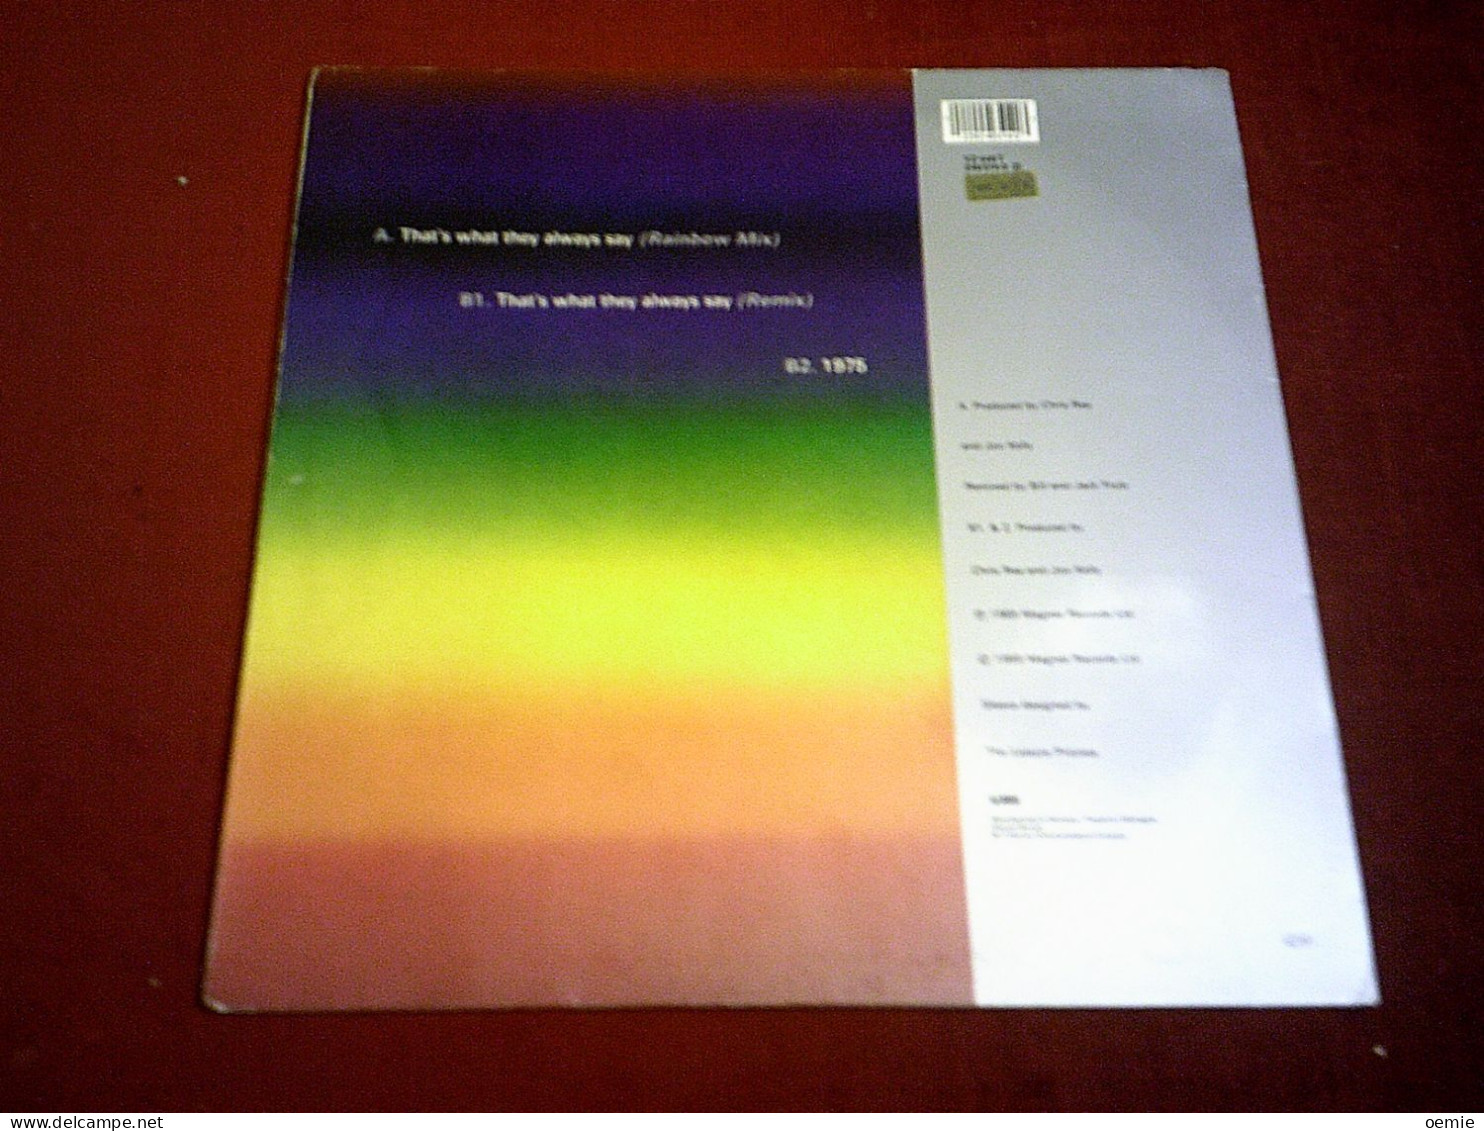 CHRIS REA   / THAT'S WHAT THEY ALWAYS SAY ( RAINBOW MIX ) - 45 G - Maxi-Single